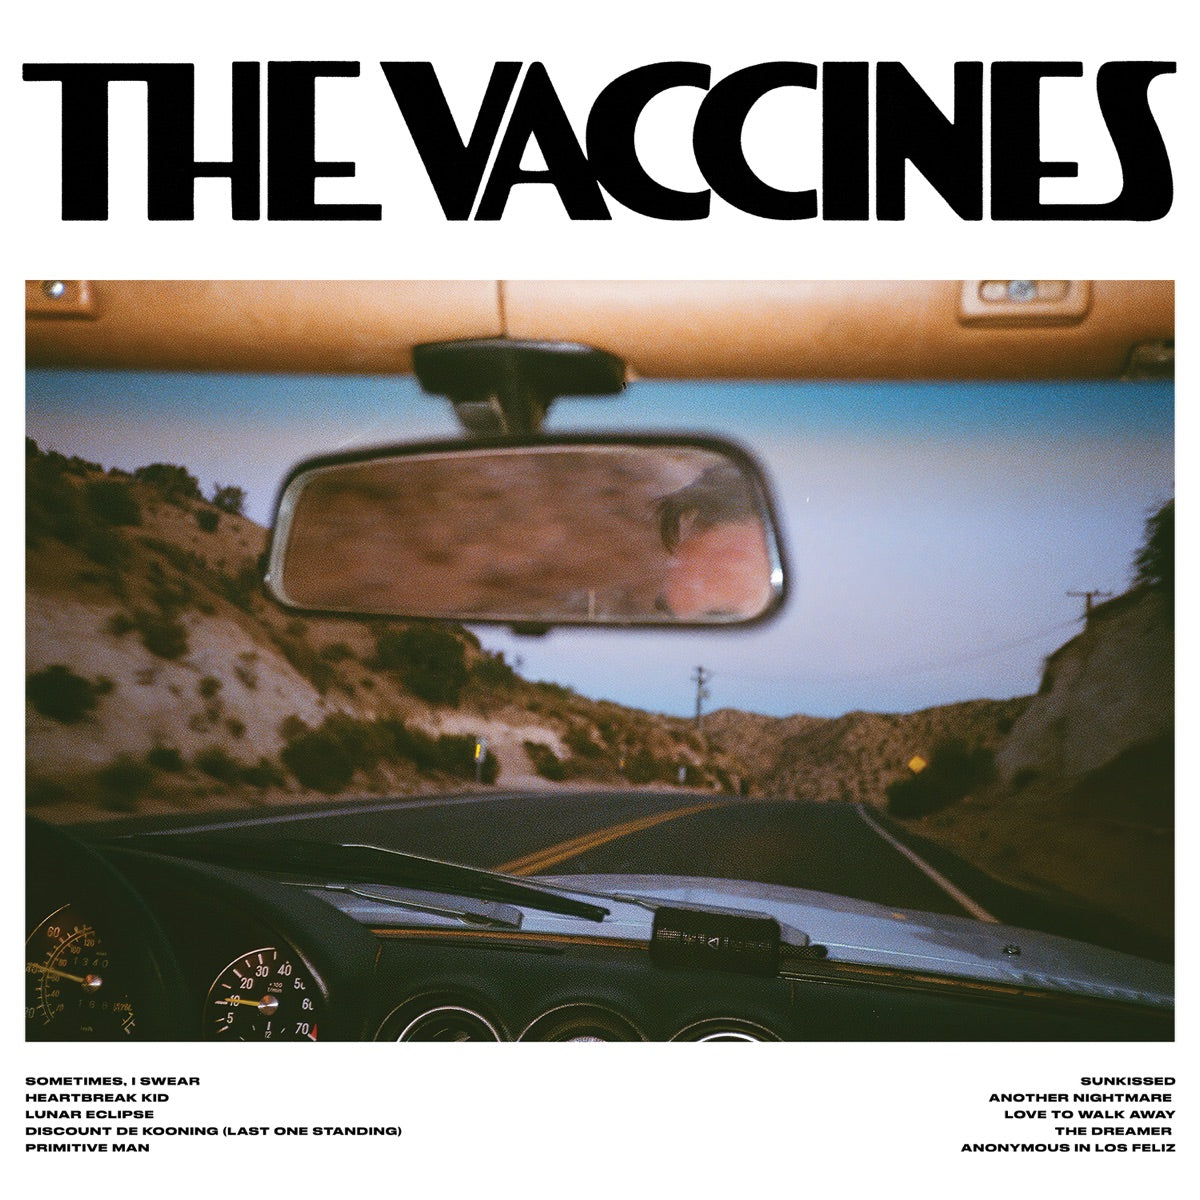 THE VACCINES - PICK-UP FULL OF PINK CARNATIONS Vinyl LP